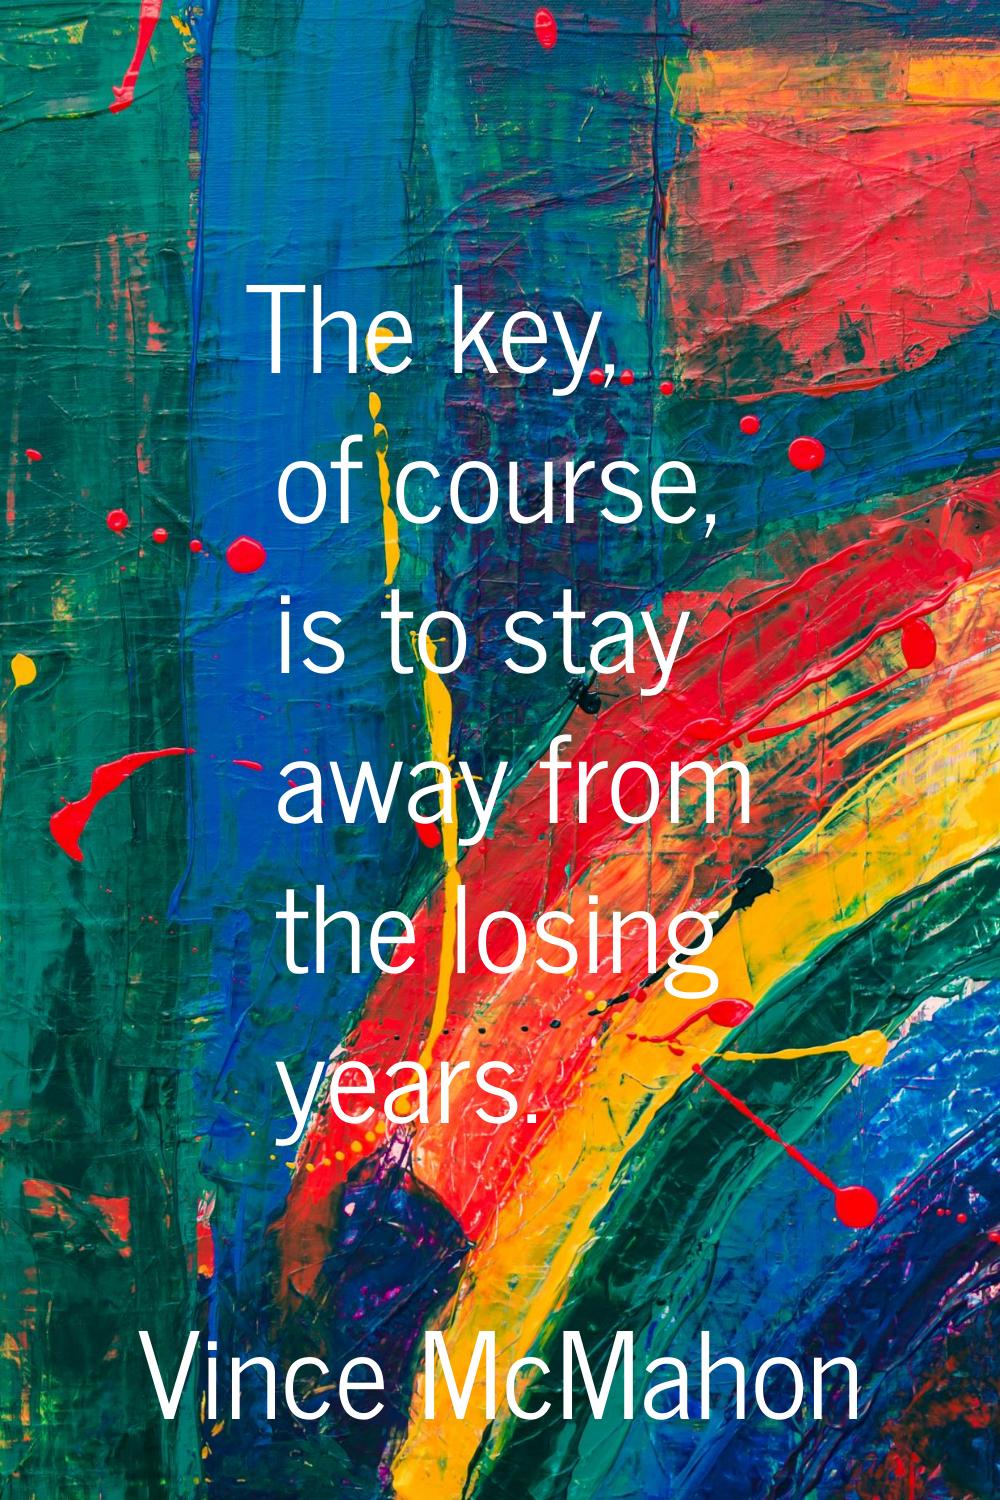 The key, of course, is to stay away from the losing years.